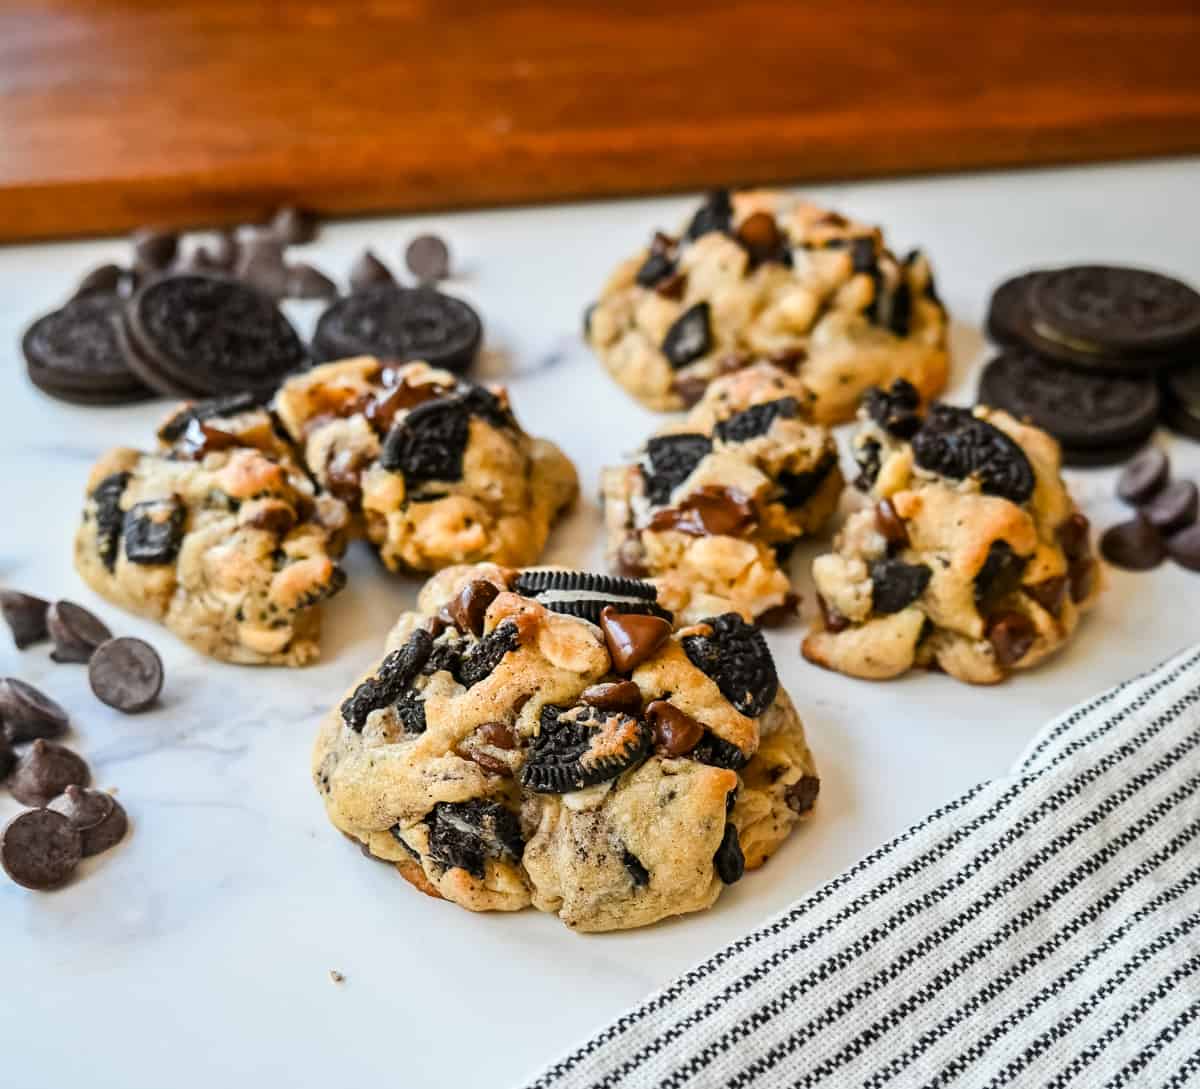 Bakery Style Oreo Cookies. Thick, soft bakery style chocolate chip OREO cookies. These OREO Cookies and Cream Cookies are soft, chewy and perfect for OREO lovers.